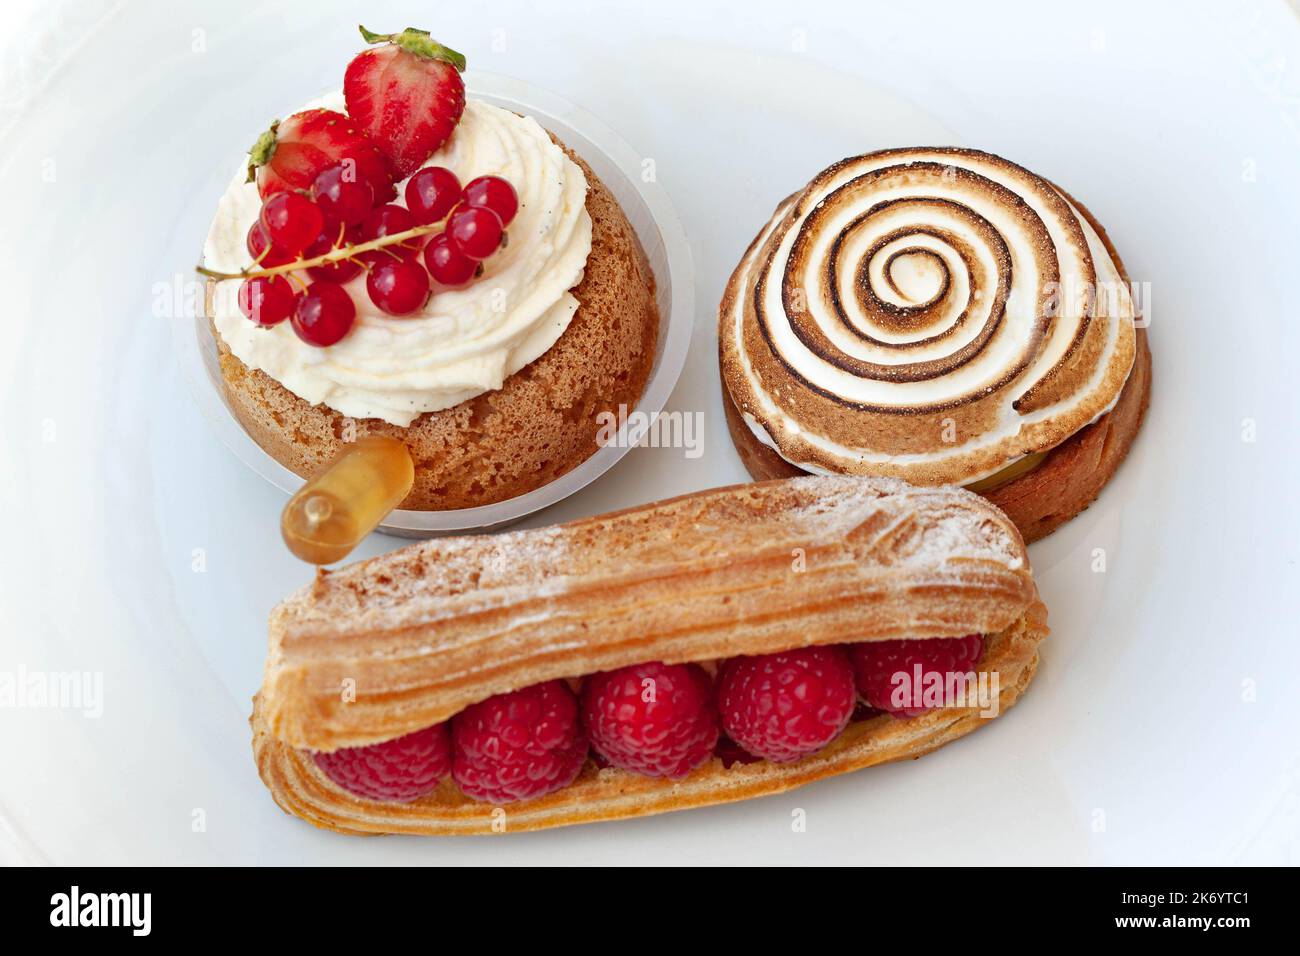 Three appetizing pastries on a white background Stock Photo